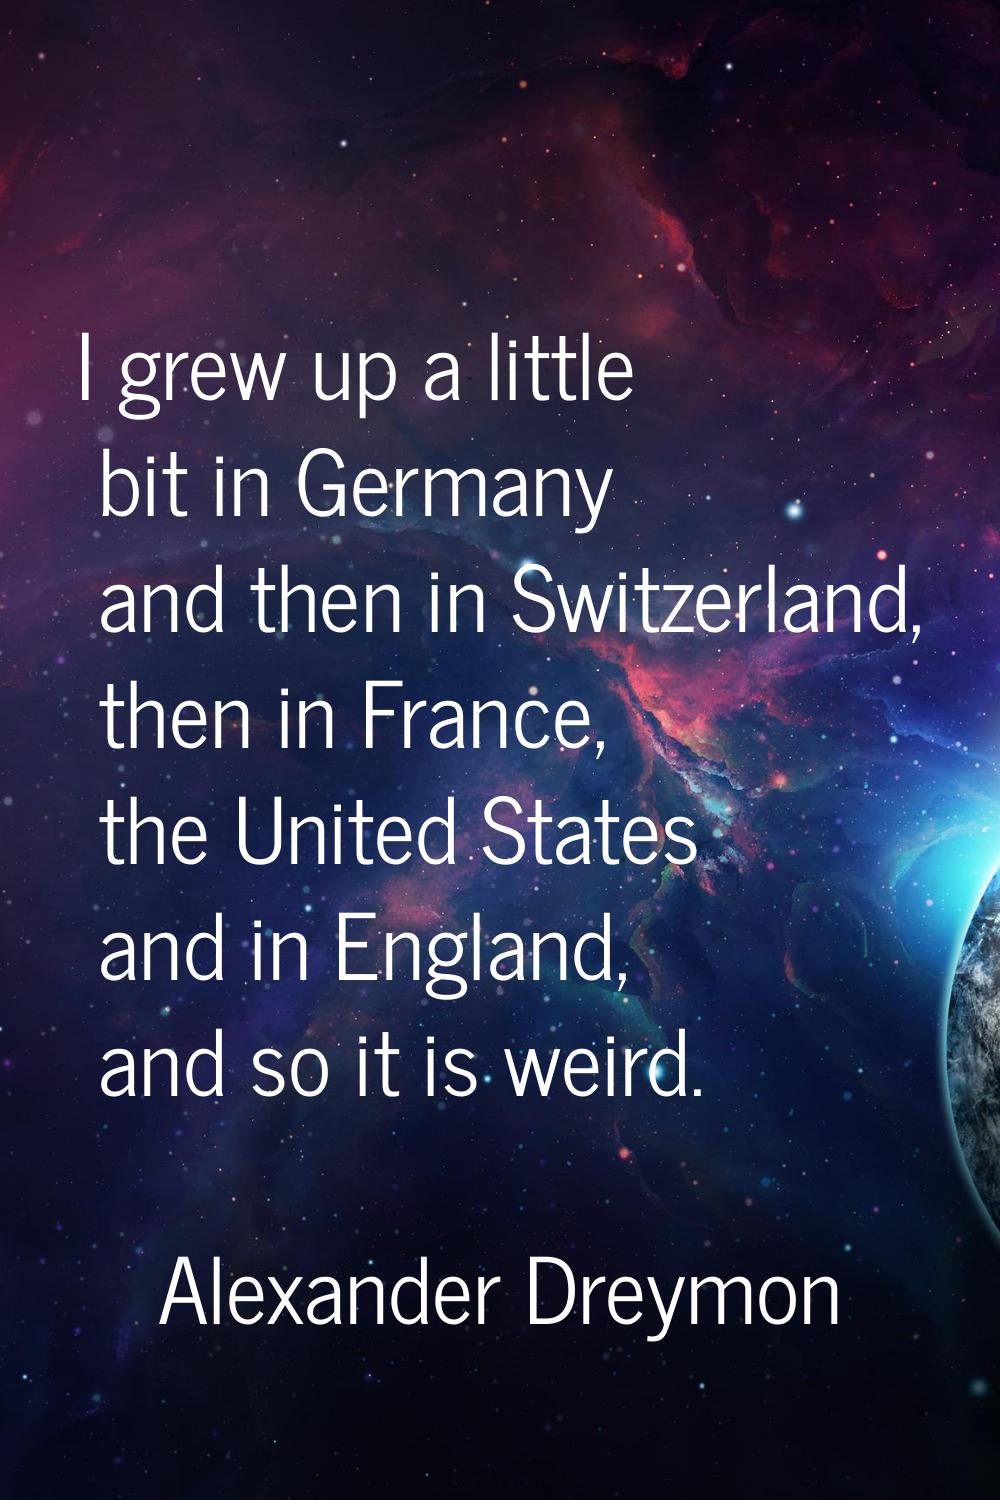 I grew up a little bit in Germany and then in Switzerland, then in France, the United States and in